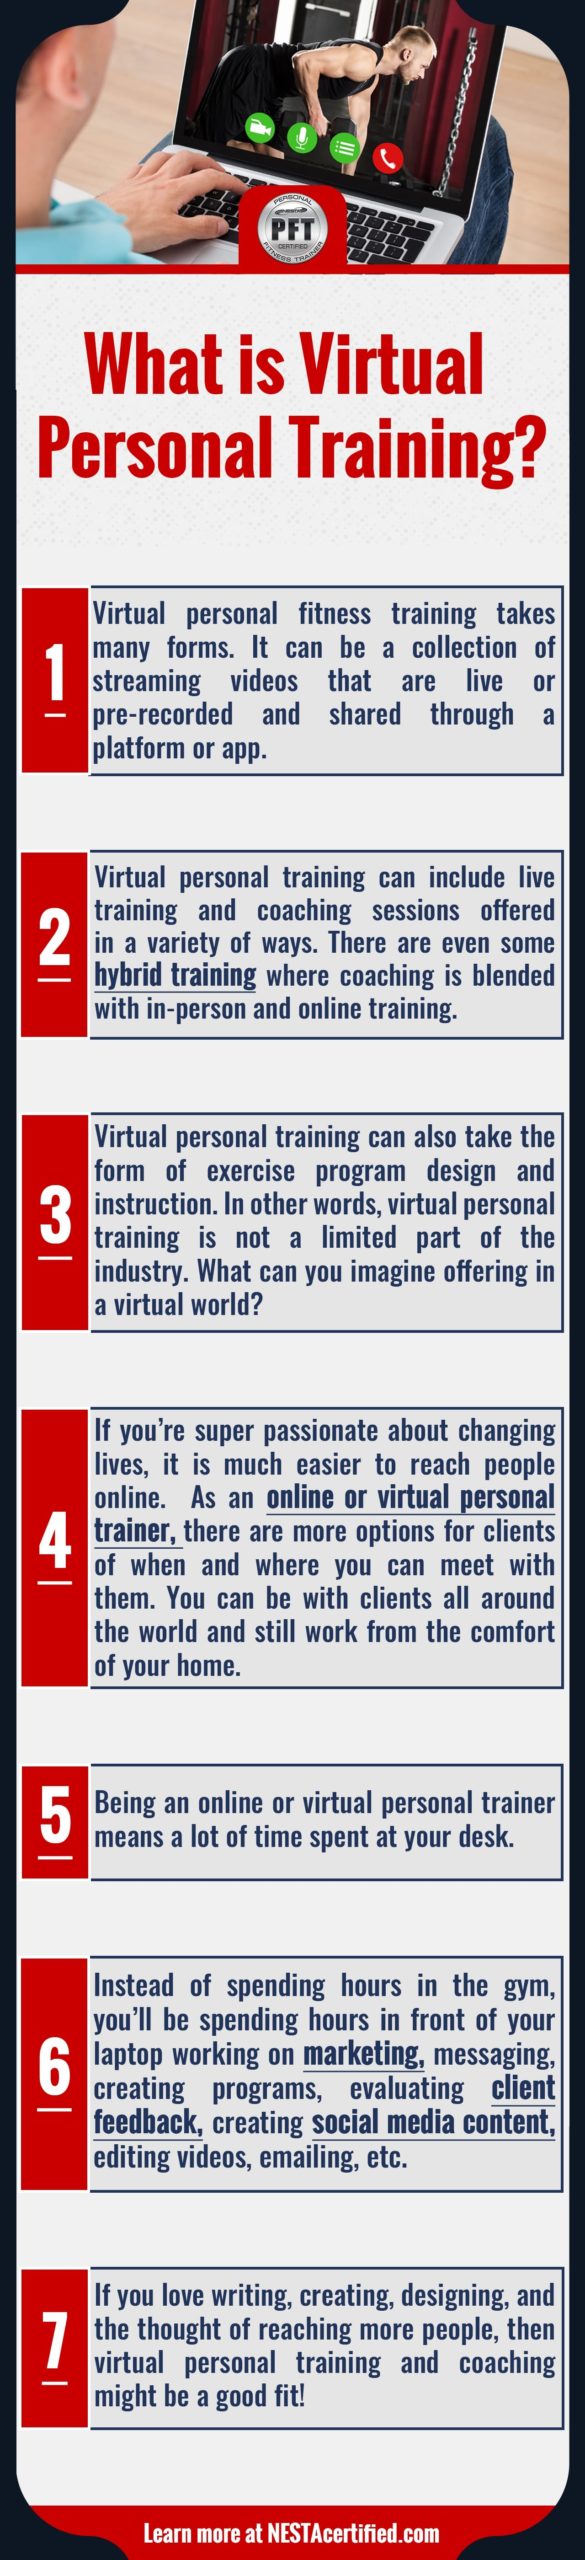 get-started-virtual-personal-training